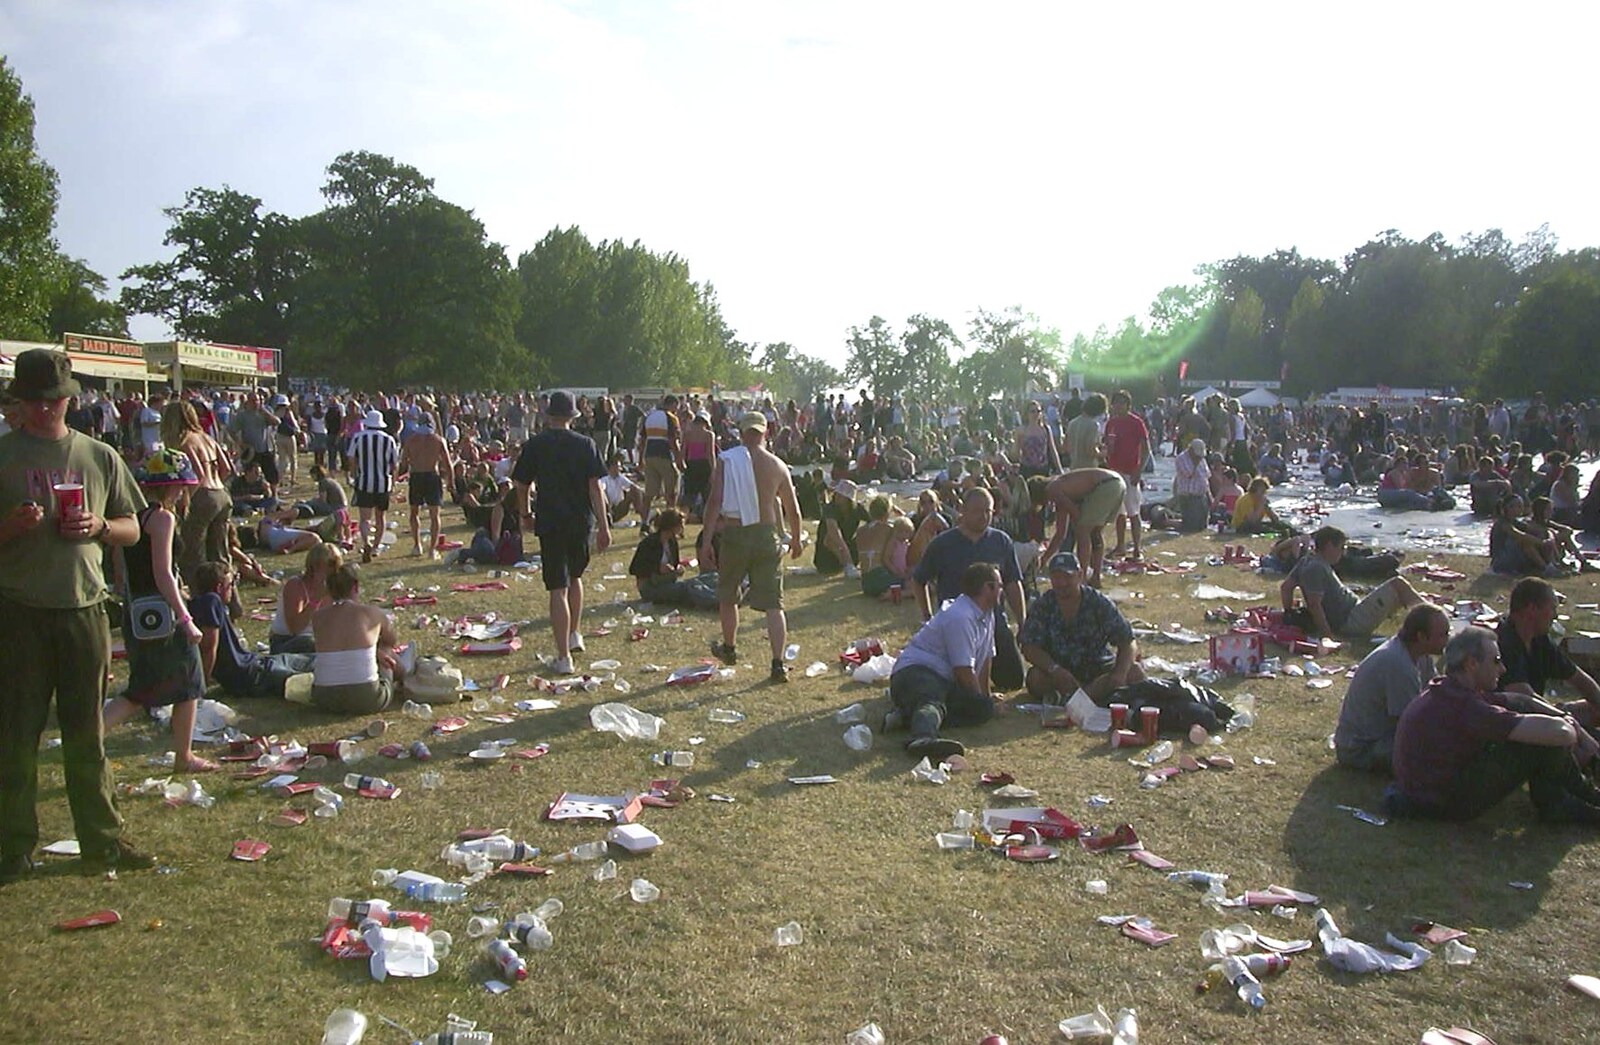 The mess builds up, and it's only the afternoon from V Festival 2003, Hyland's Park, Chelmsford, Essex - 16th August 2003